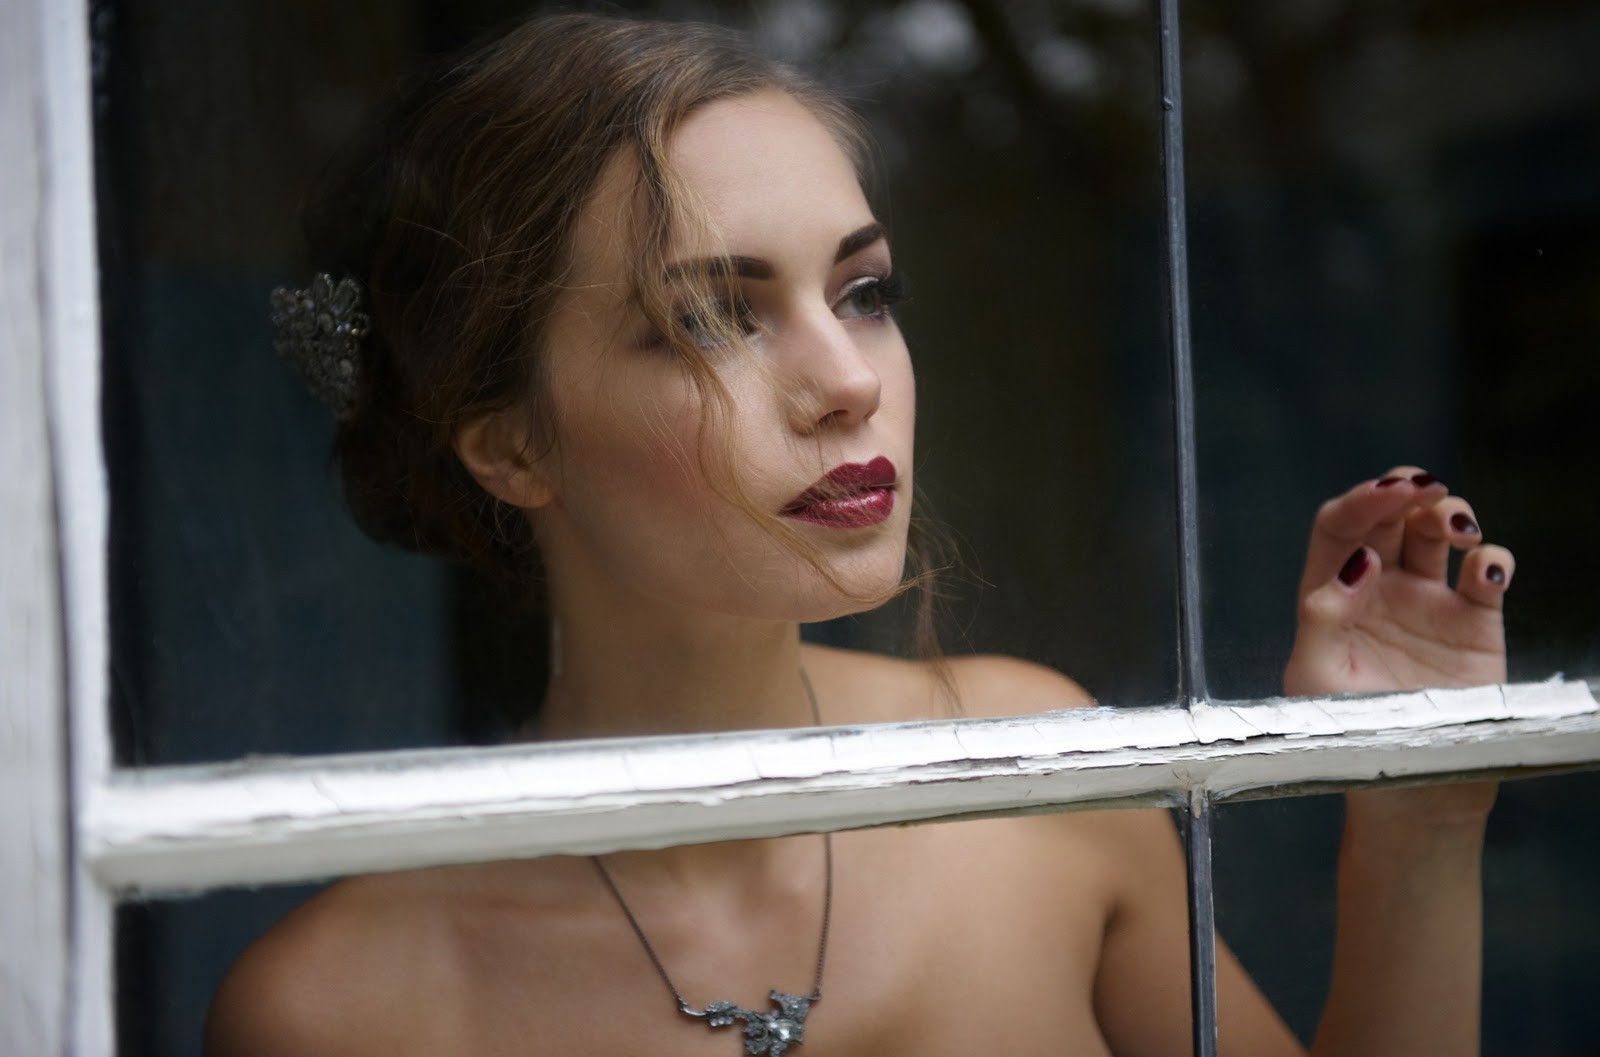 People 1600x1057 Ines Eisner model women brunette red lipstick looking out window necklace painted nails hair in face makeup